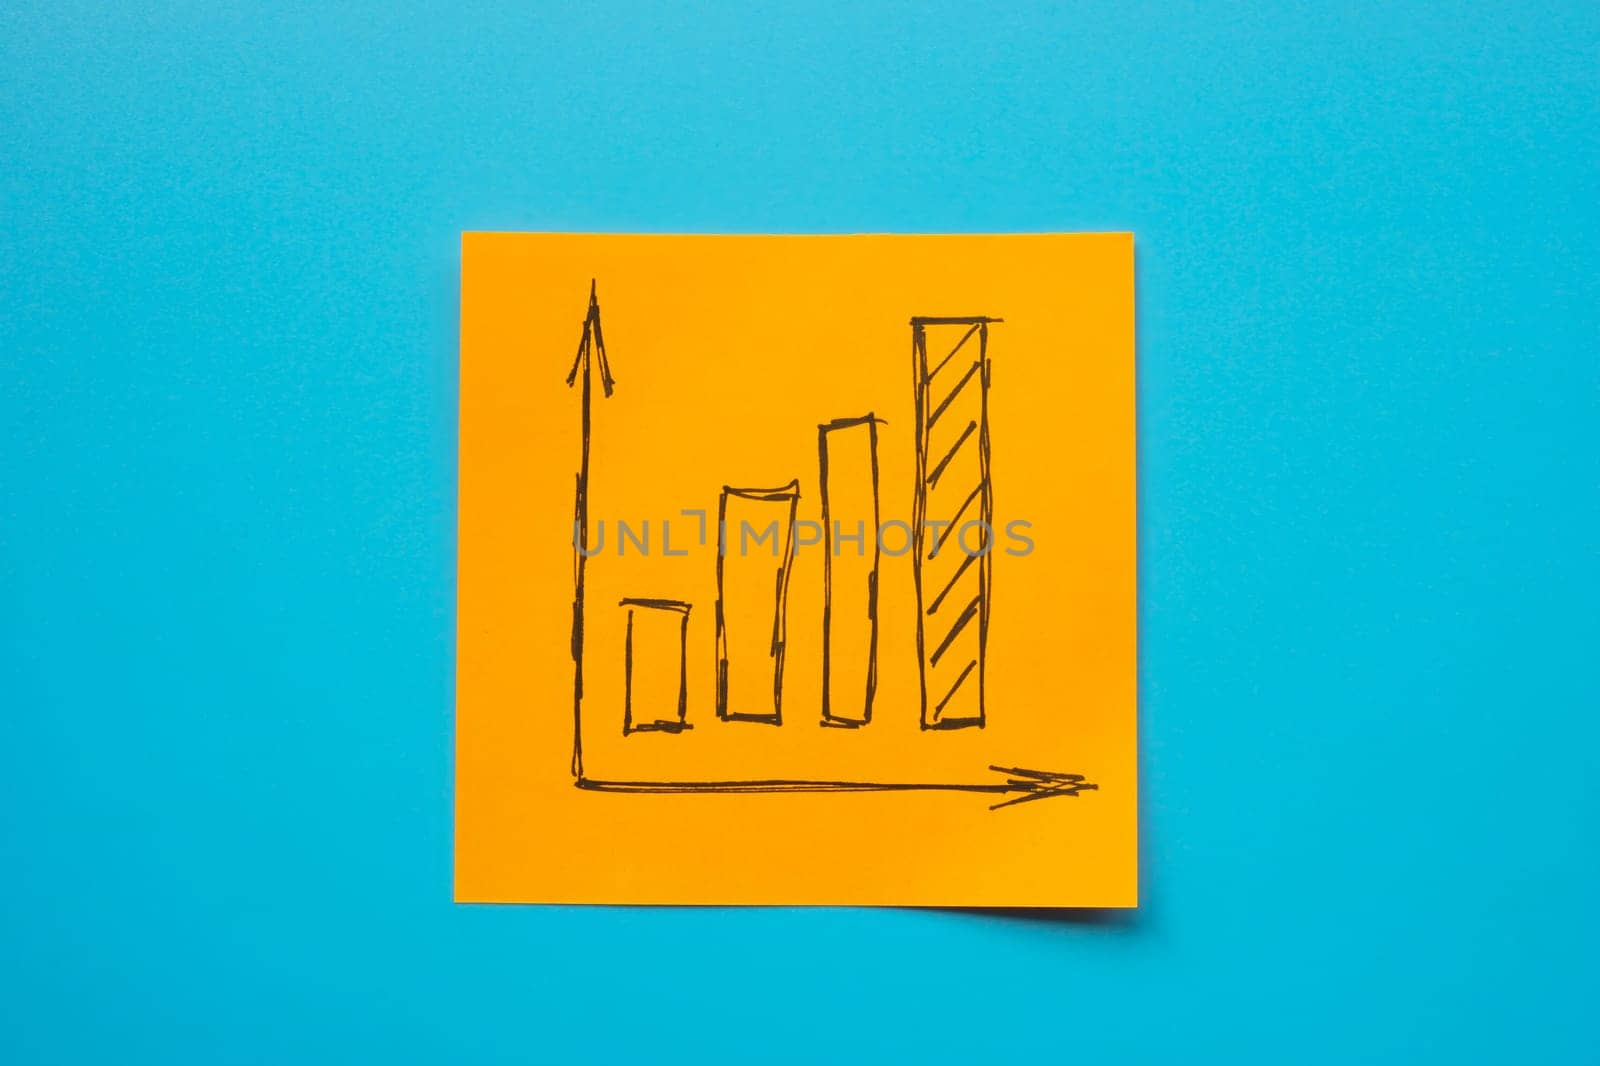 An orange sticker with growing graph symbolizing business success, growth and increase.